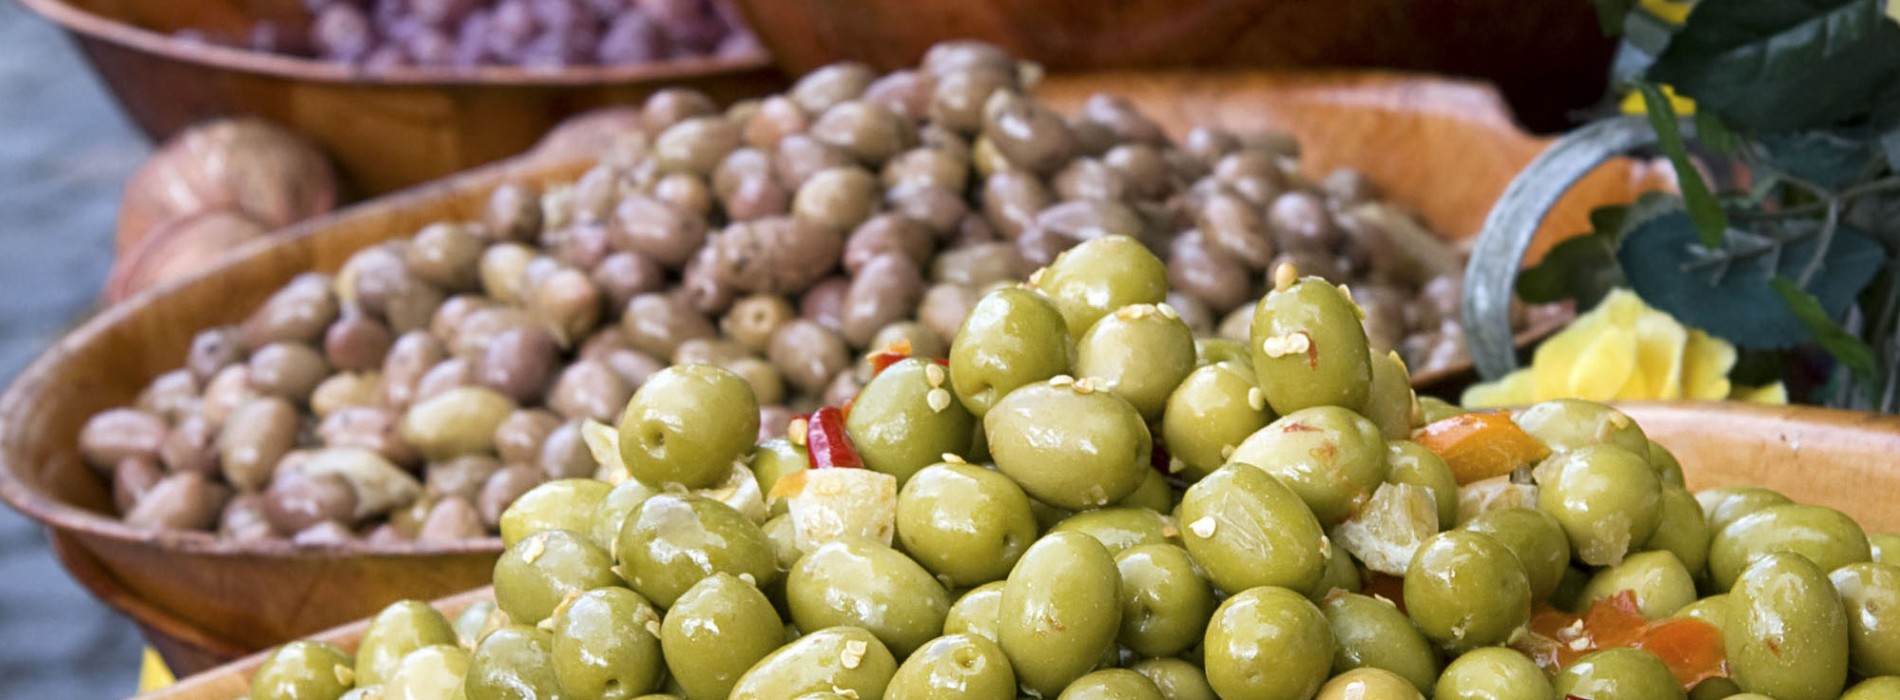 Experience the Greece countryside with Olive harvesting season